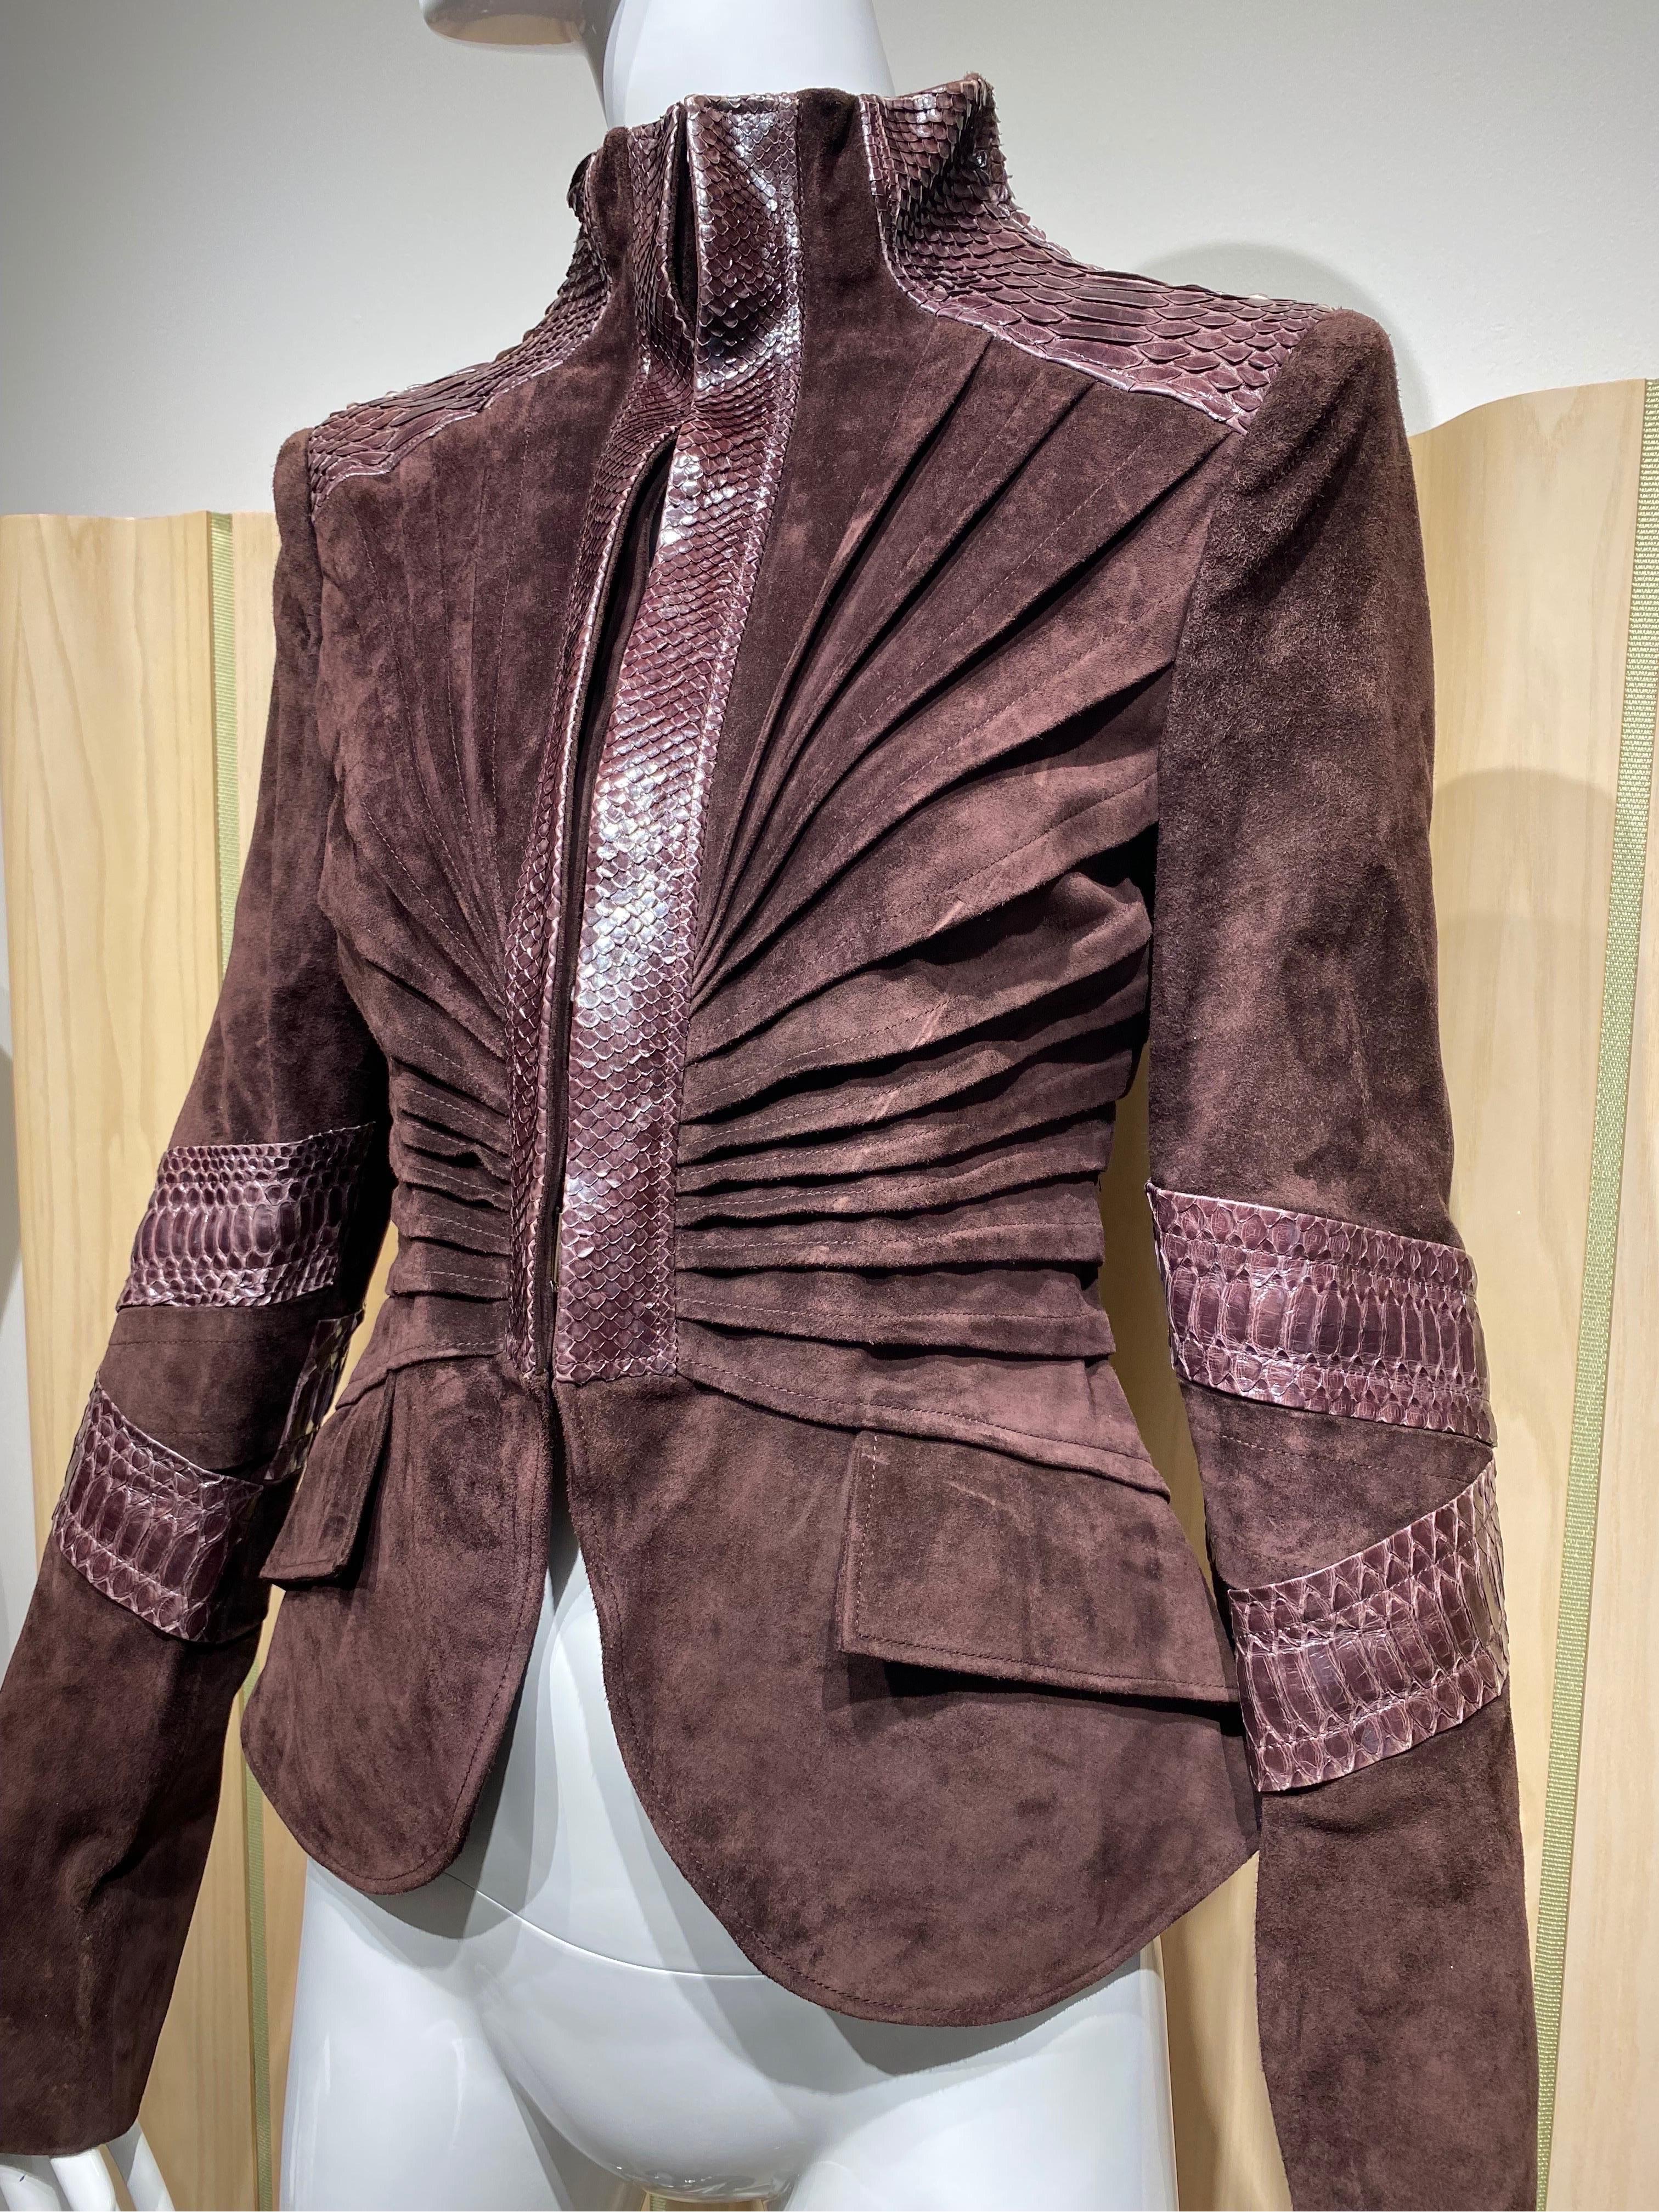 Gucci By Tom Ford Dark Brown Suede and Snake Skin trim leather in dark plum color.
Fitted Jacket from 2004 Fall Runway. Jacket marked size 42, Fit US size 6
Measurement: 
Shoulder : 15.5/ Bust 34” / Waist 29” / Hip 37” / Sleeve length: 25.5”